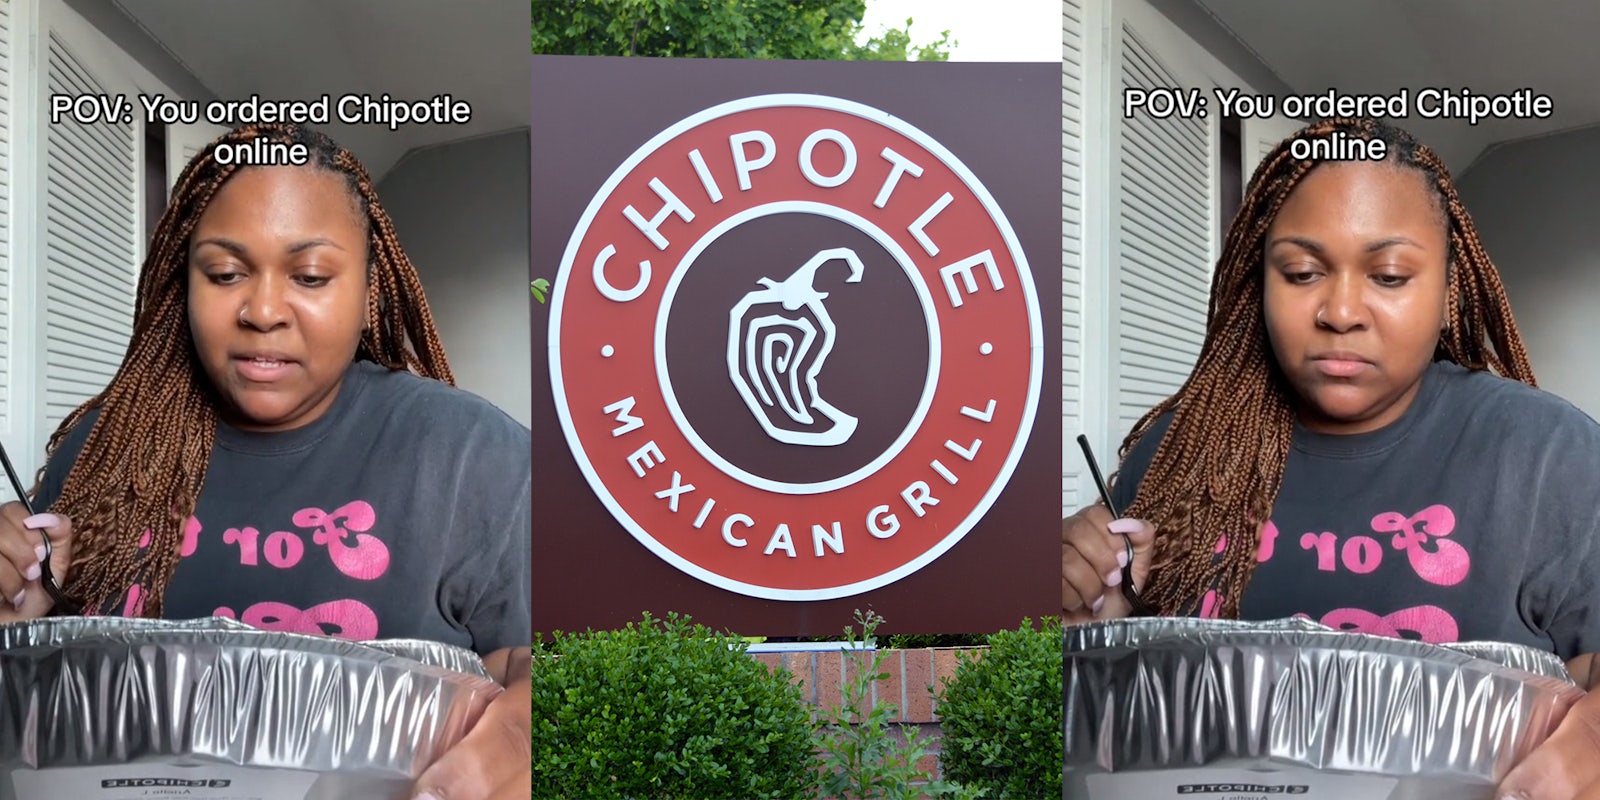 Customer complains about Chipotle for botching online orders